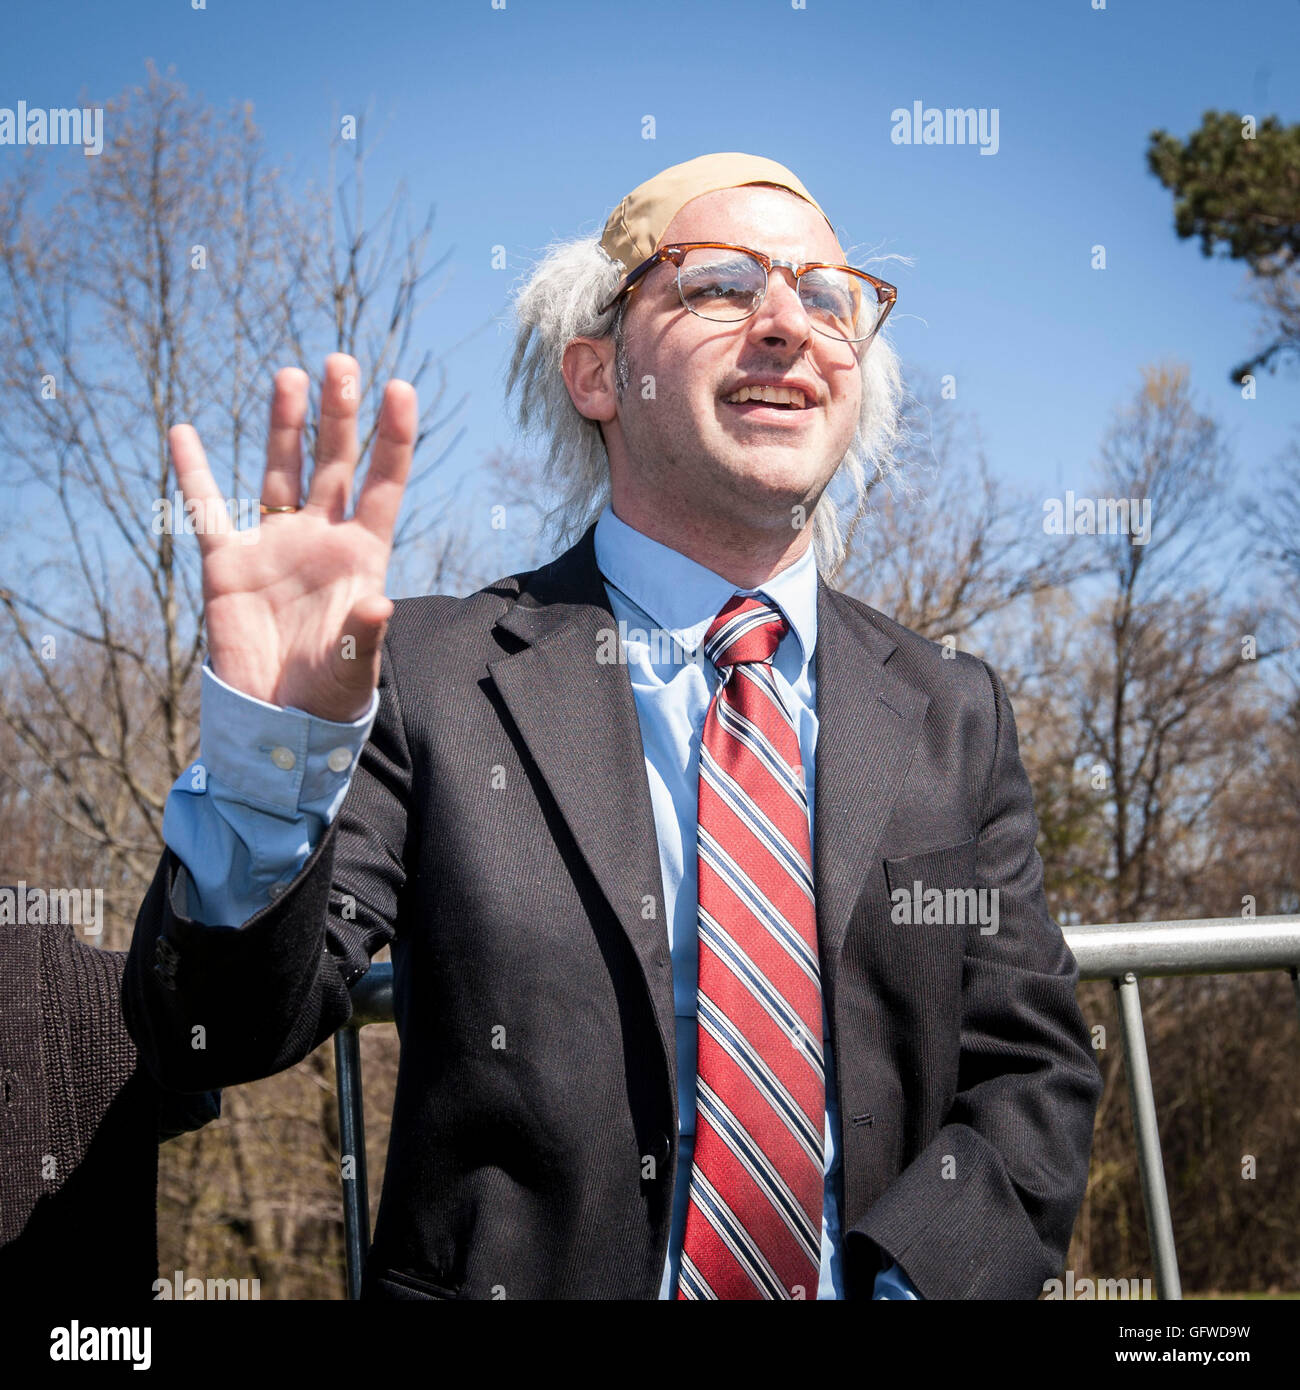 2016 March 17, USA New York, Brooklyn. Democratic presidential nomination candidate Bernie Sanders rally in Prospect Park. Stock Photo